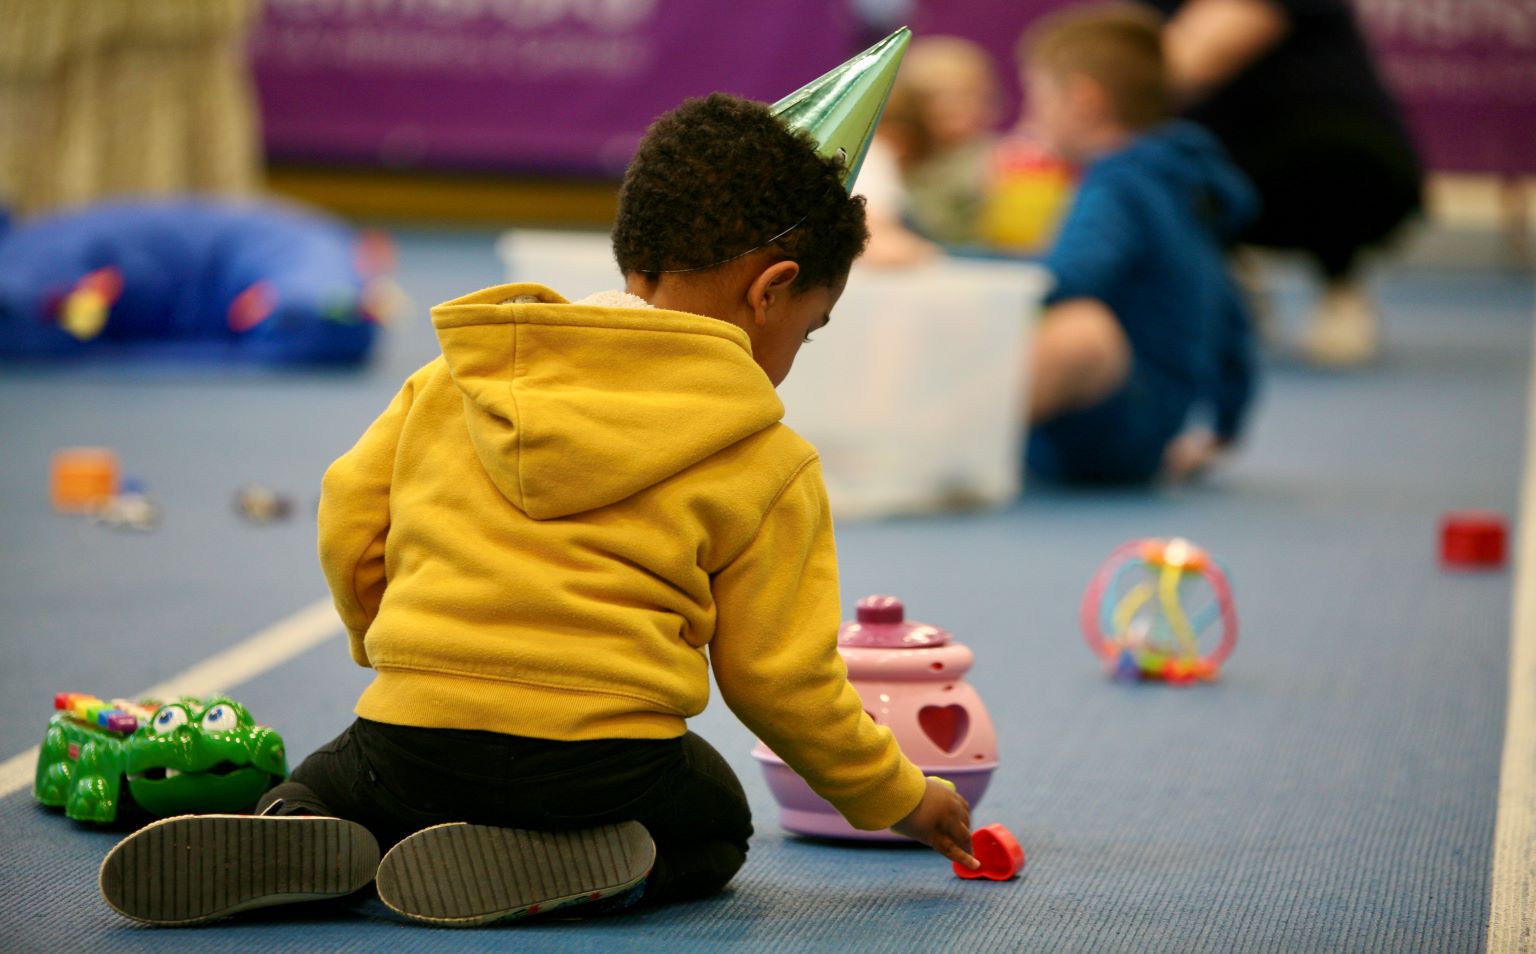 A young black child is sitting on the floor at a party, playing with plastic toys. He is wearing a pointed party hat and a bright yellow hoodie. He is facing away from the camera playing with toys which are on the floor.